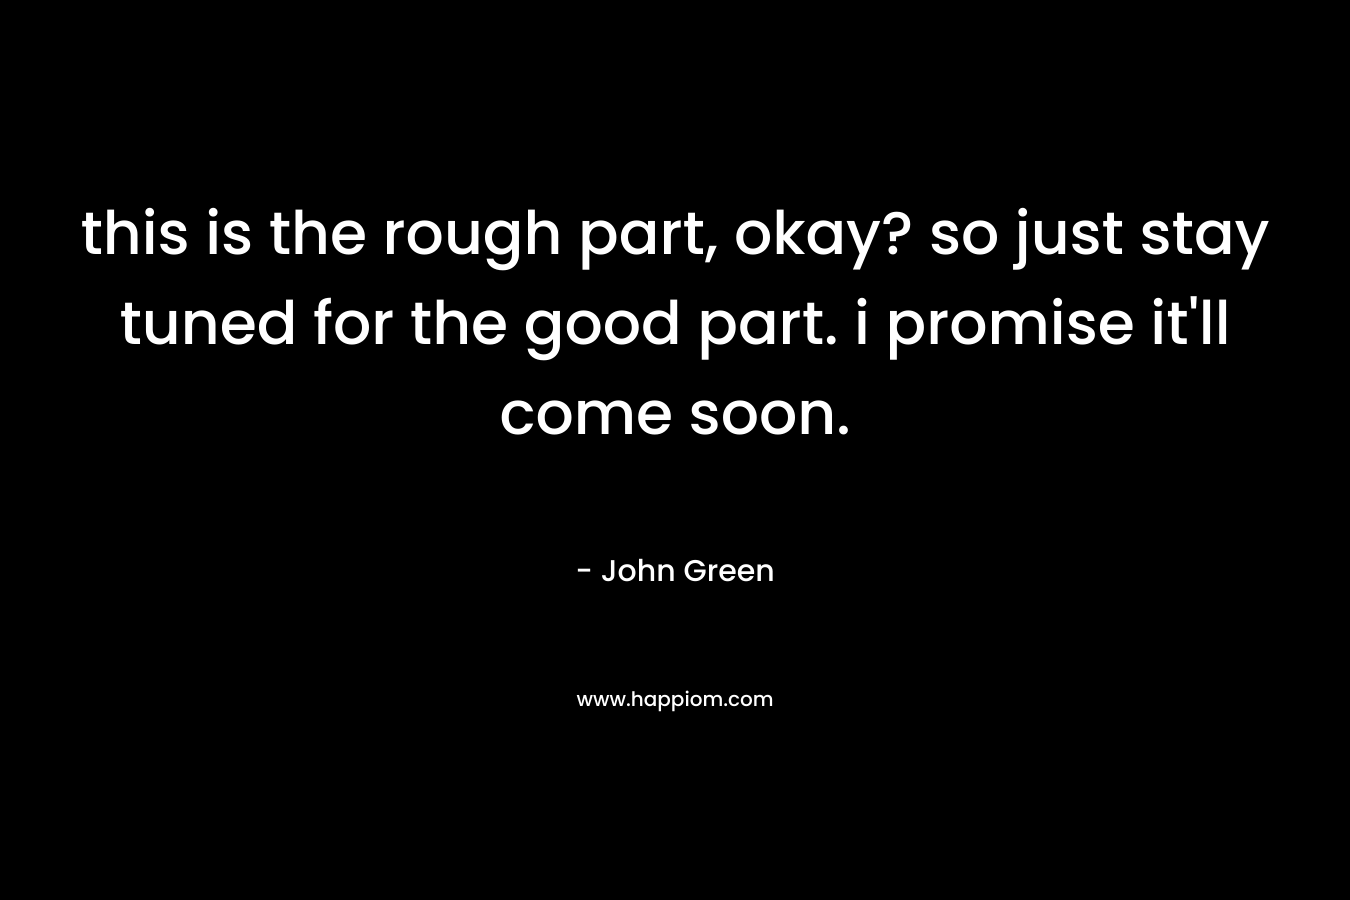 this is the rough part, okay? so just stay tuned for the good part. i promise it’ll come soon. – John Green